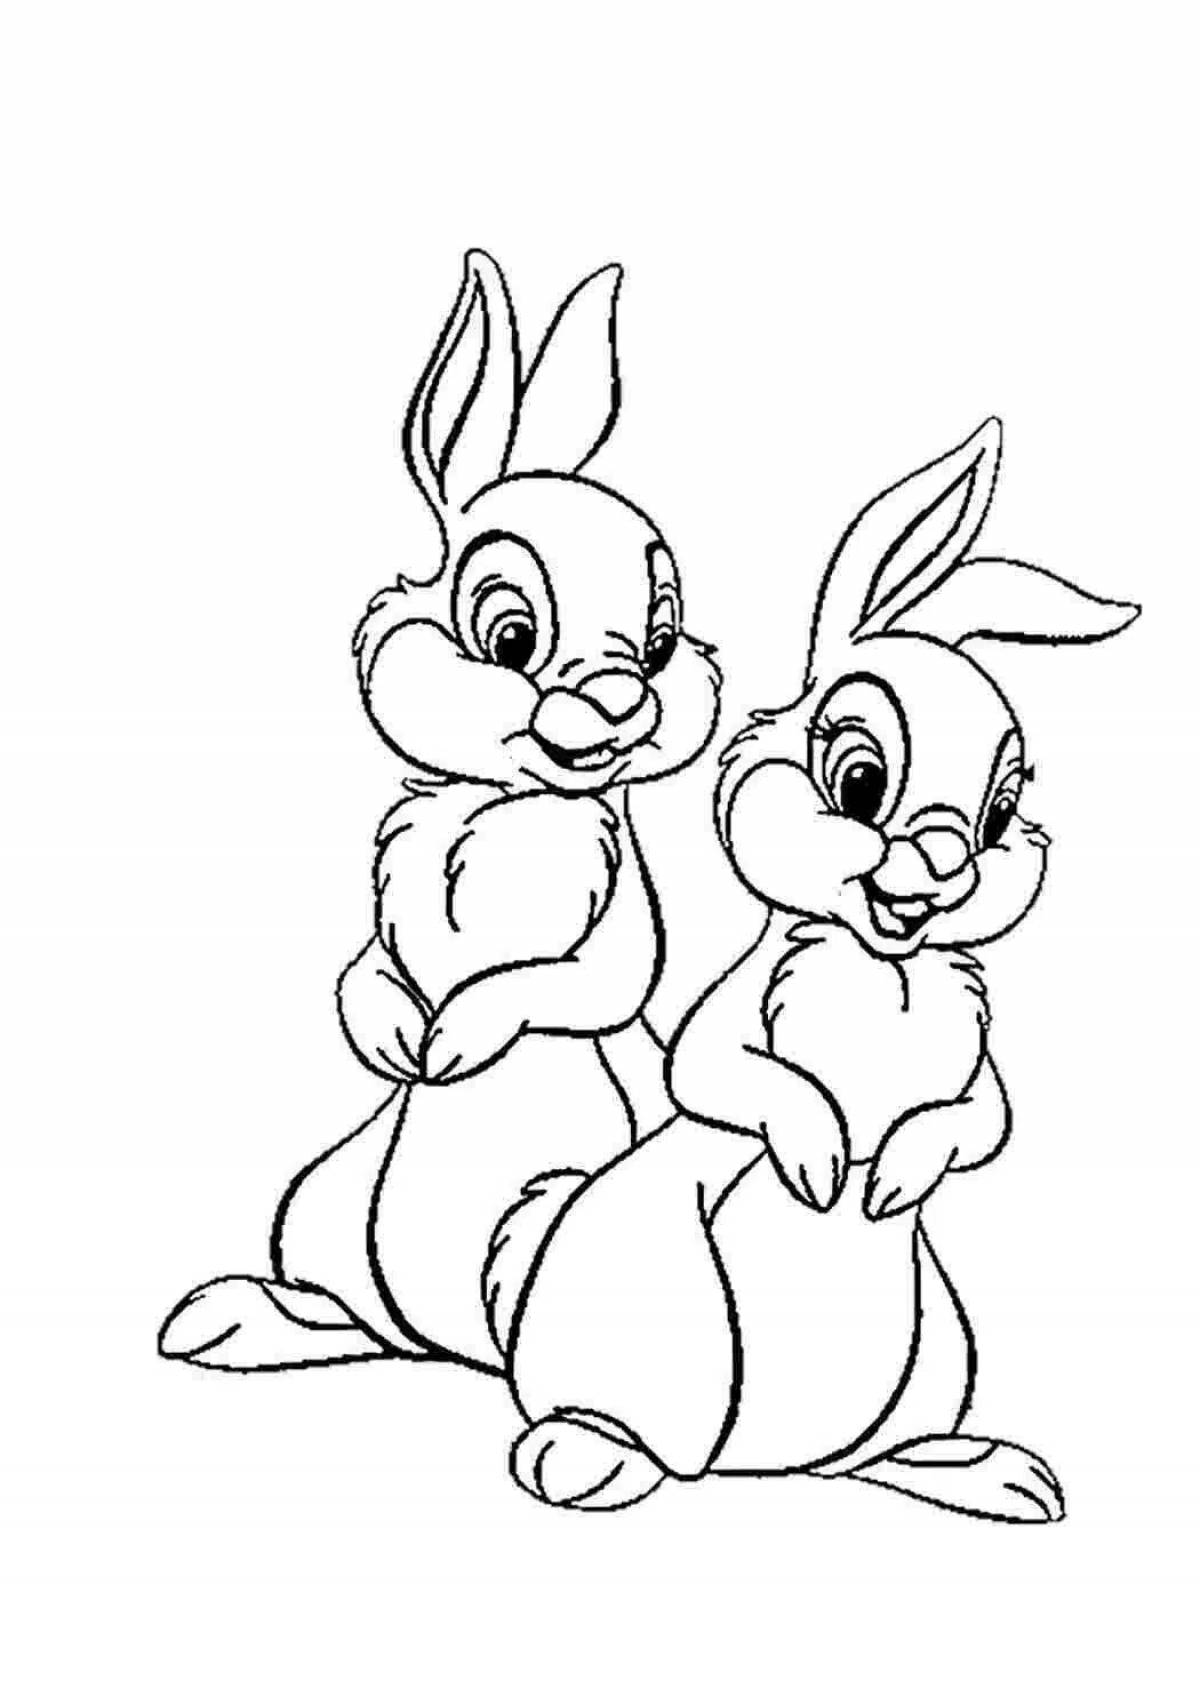 Delightful coloring hare and squirrel